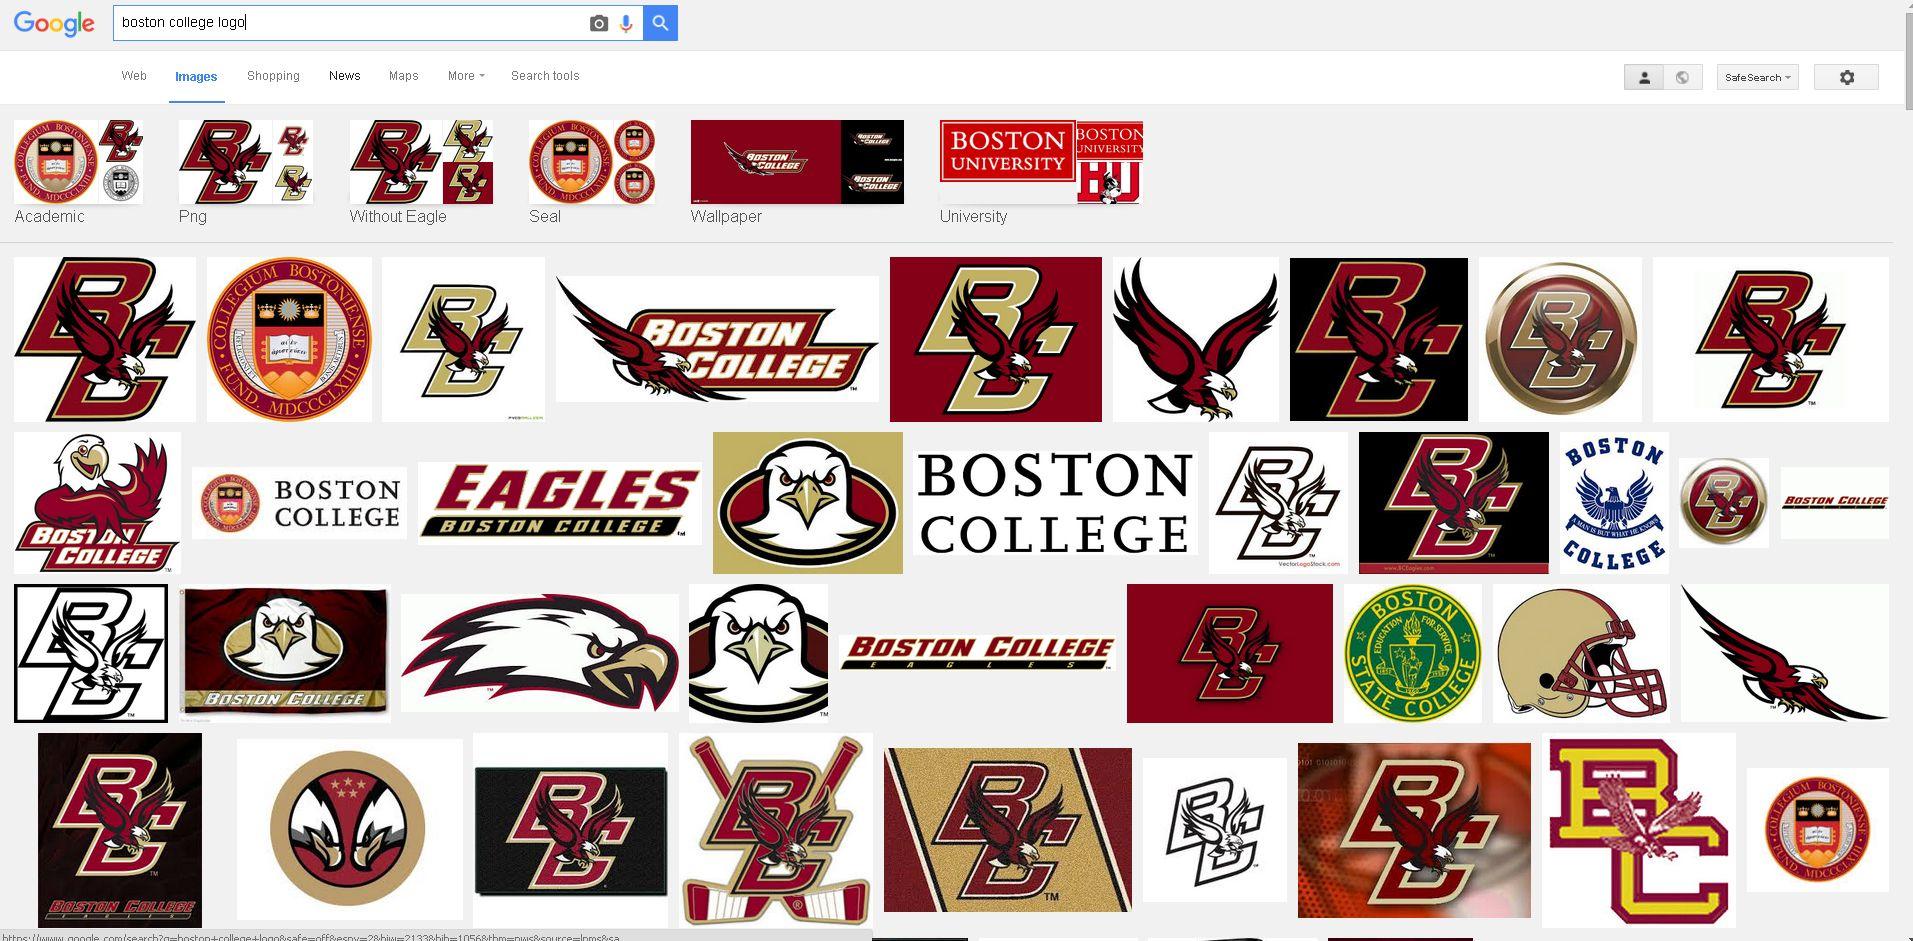 Boston College Logo - BC OR BC?. ISYS6621: Social Media and Digital Business